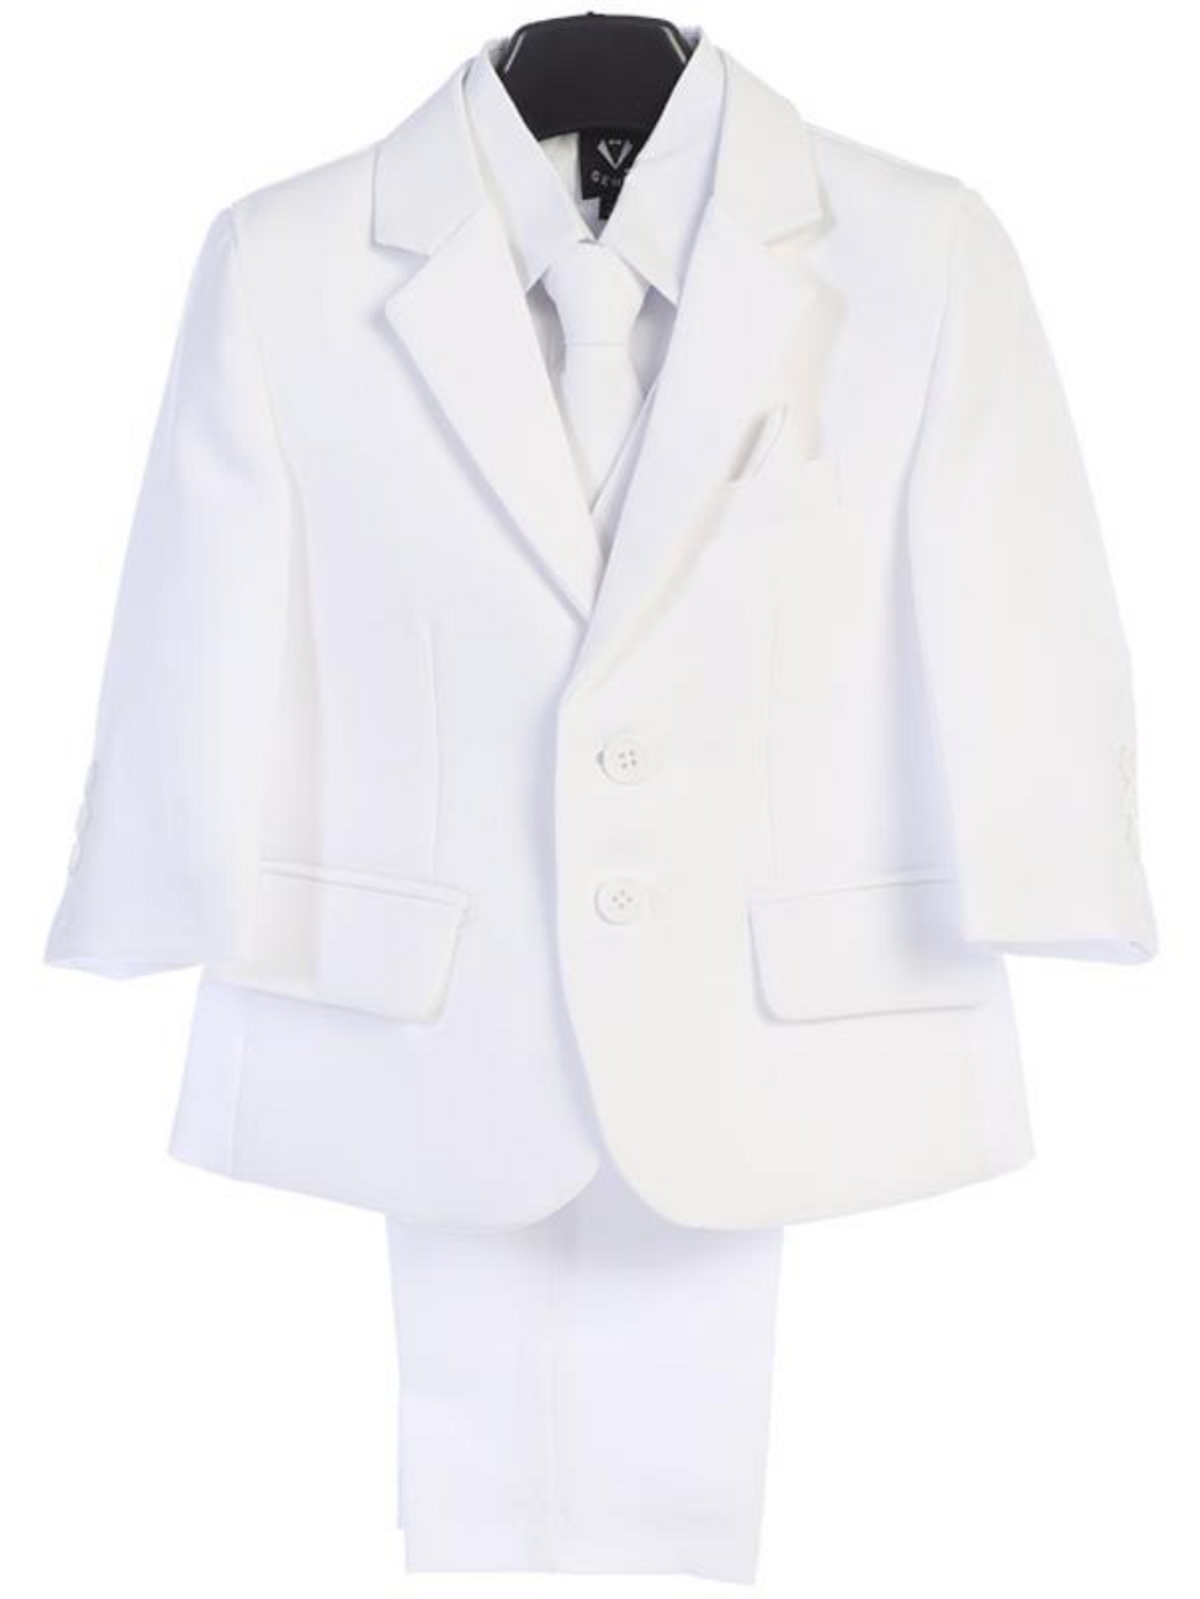 White/Cream Dinner Jackets Sportcoats | Jos A Bank